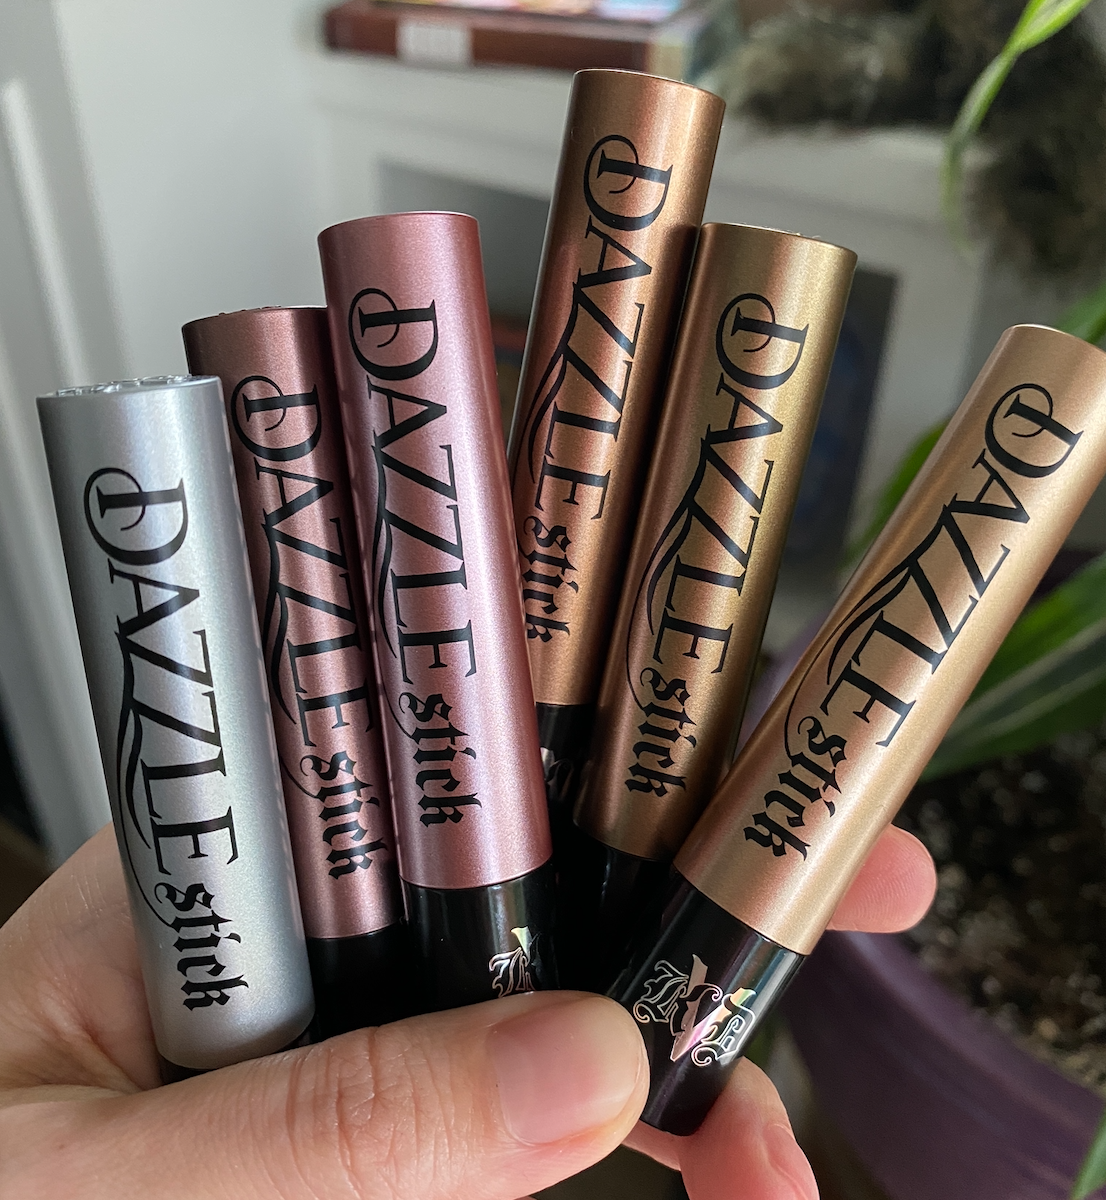 Kat D Dazzle Sticks First Impressions - Vegan Beauty Review | Vegan and Cruelty-Free Beauty, Fashion, Food, and Lifestyle : Vegan Beauty Review | Vegan and Cruelty-Free Beauty, Fashion, Food, and Lifestyle